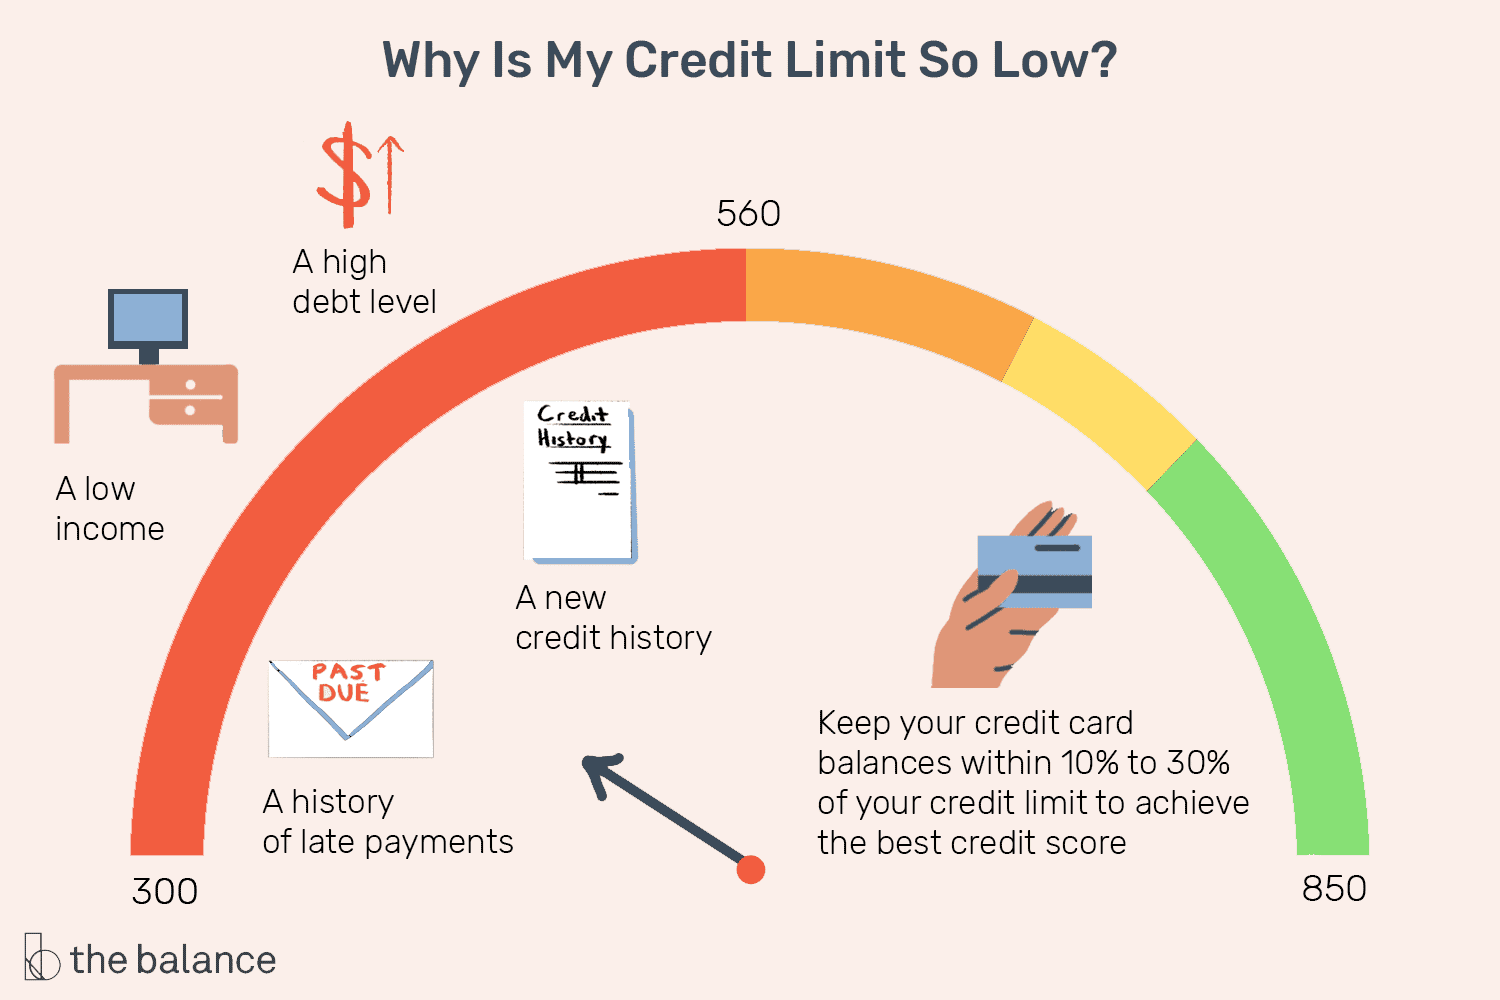 Credit Limits: What Are They?